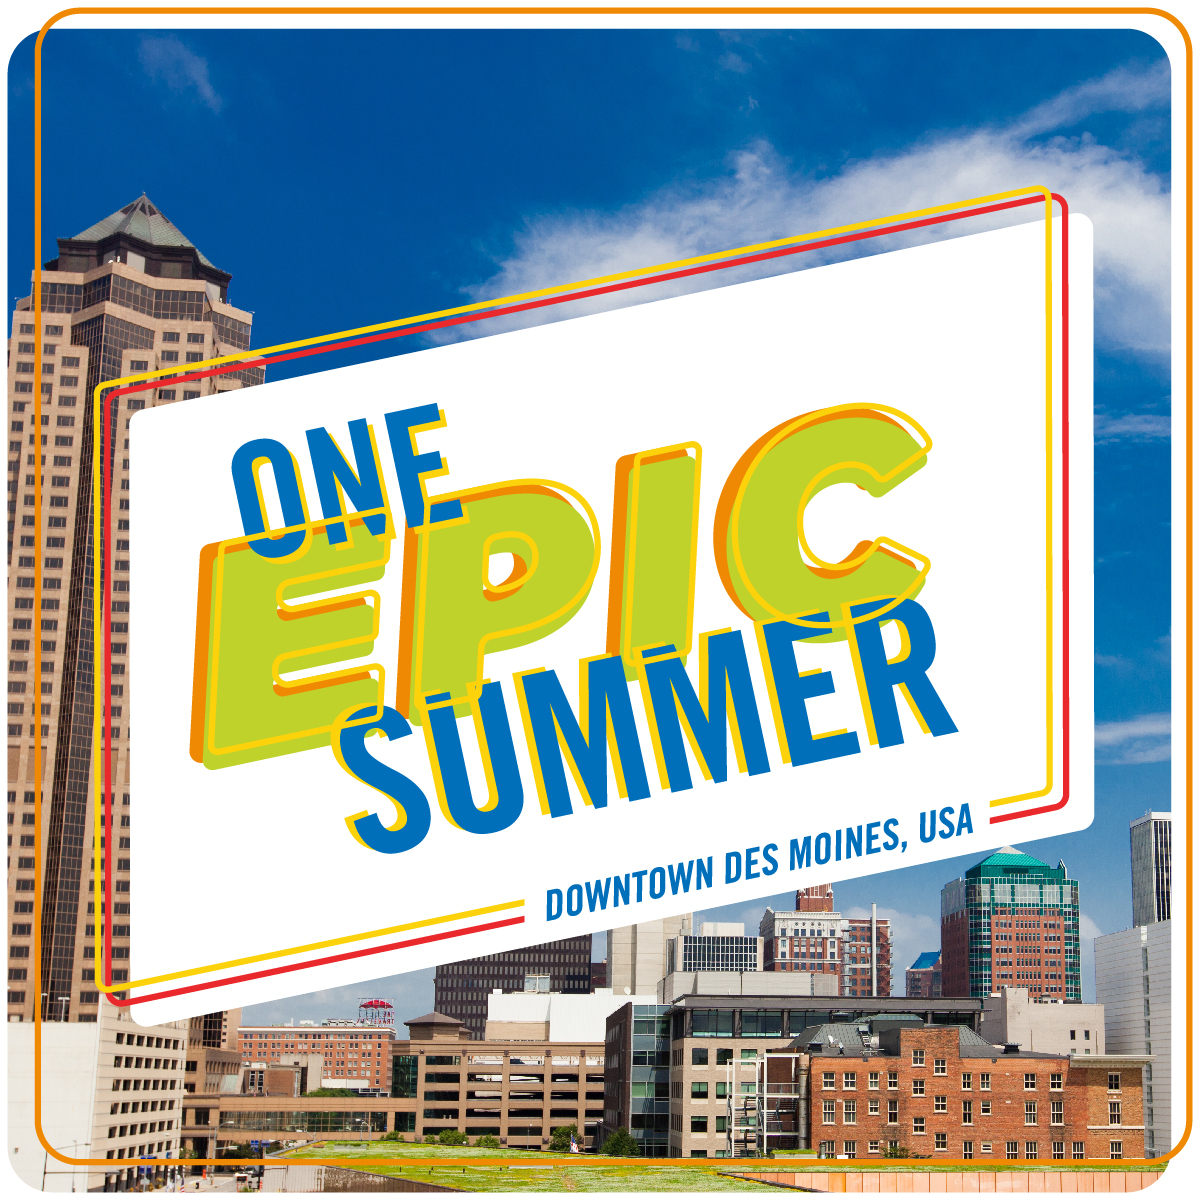 One Epic Summer in Des Moines